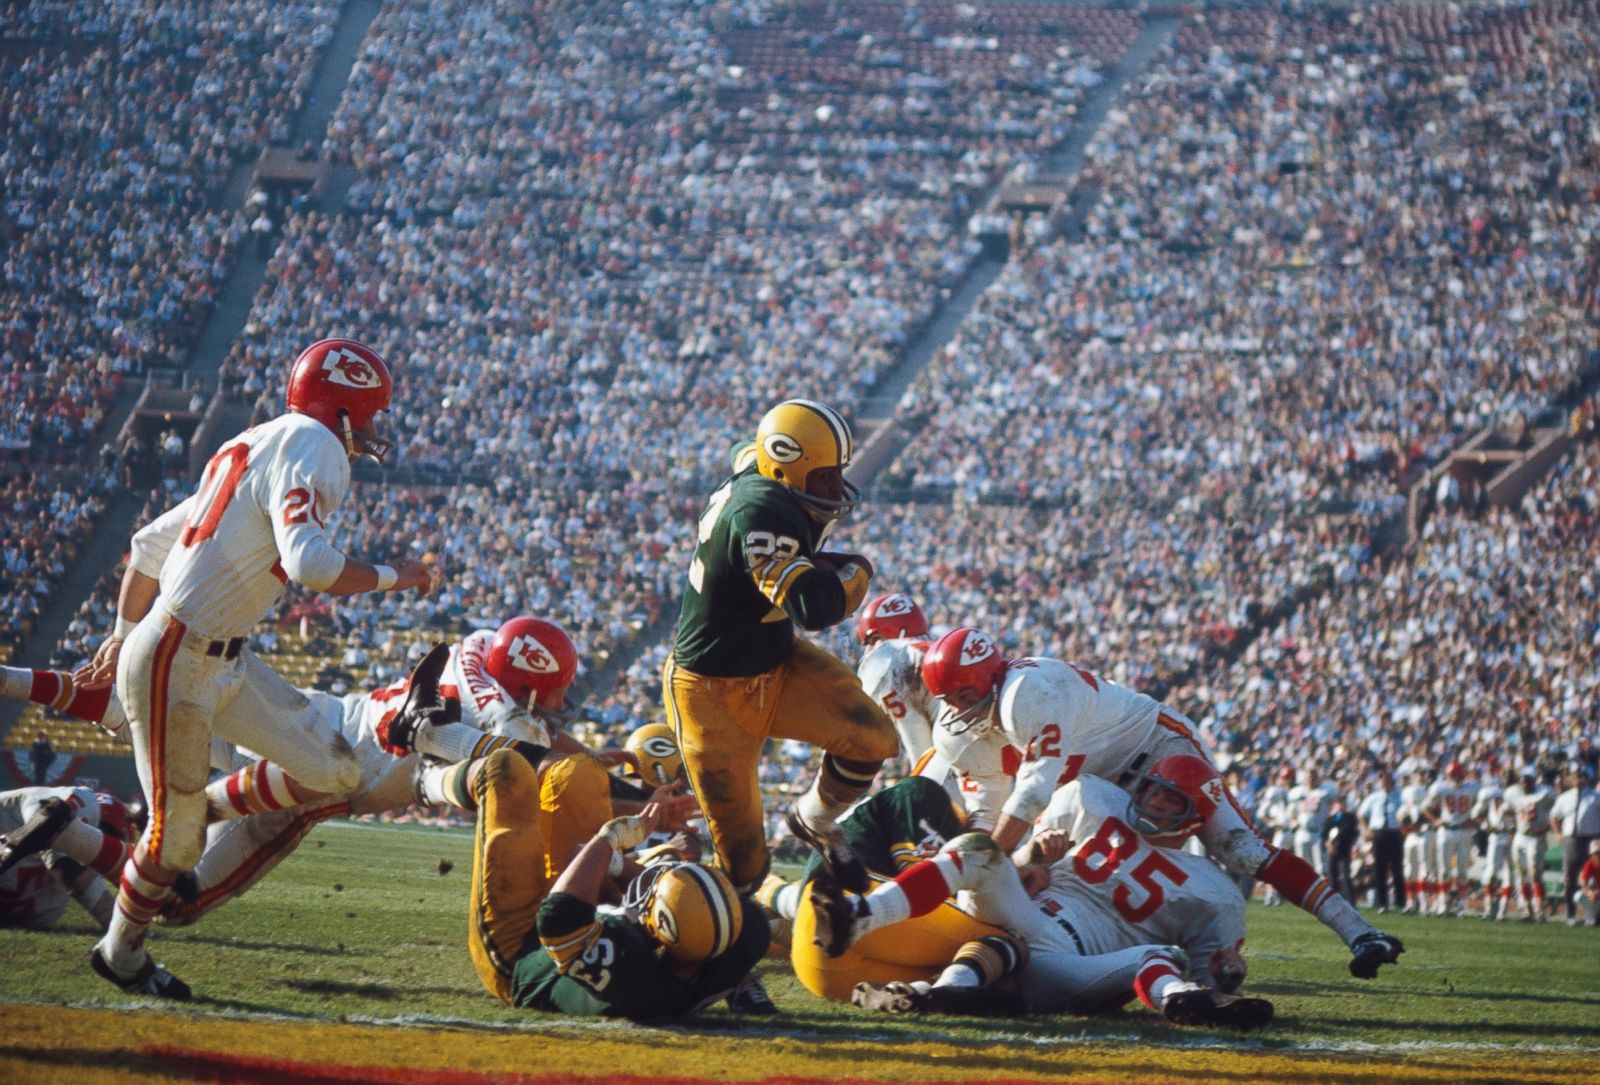 Photos from the first Super Bowl - ABC News